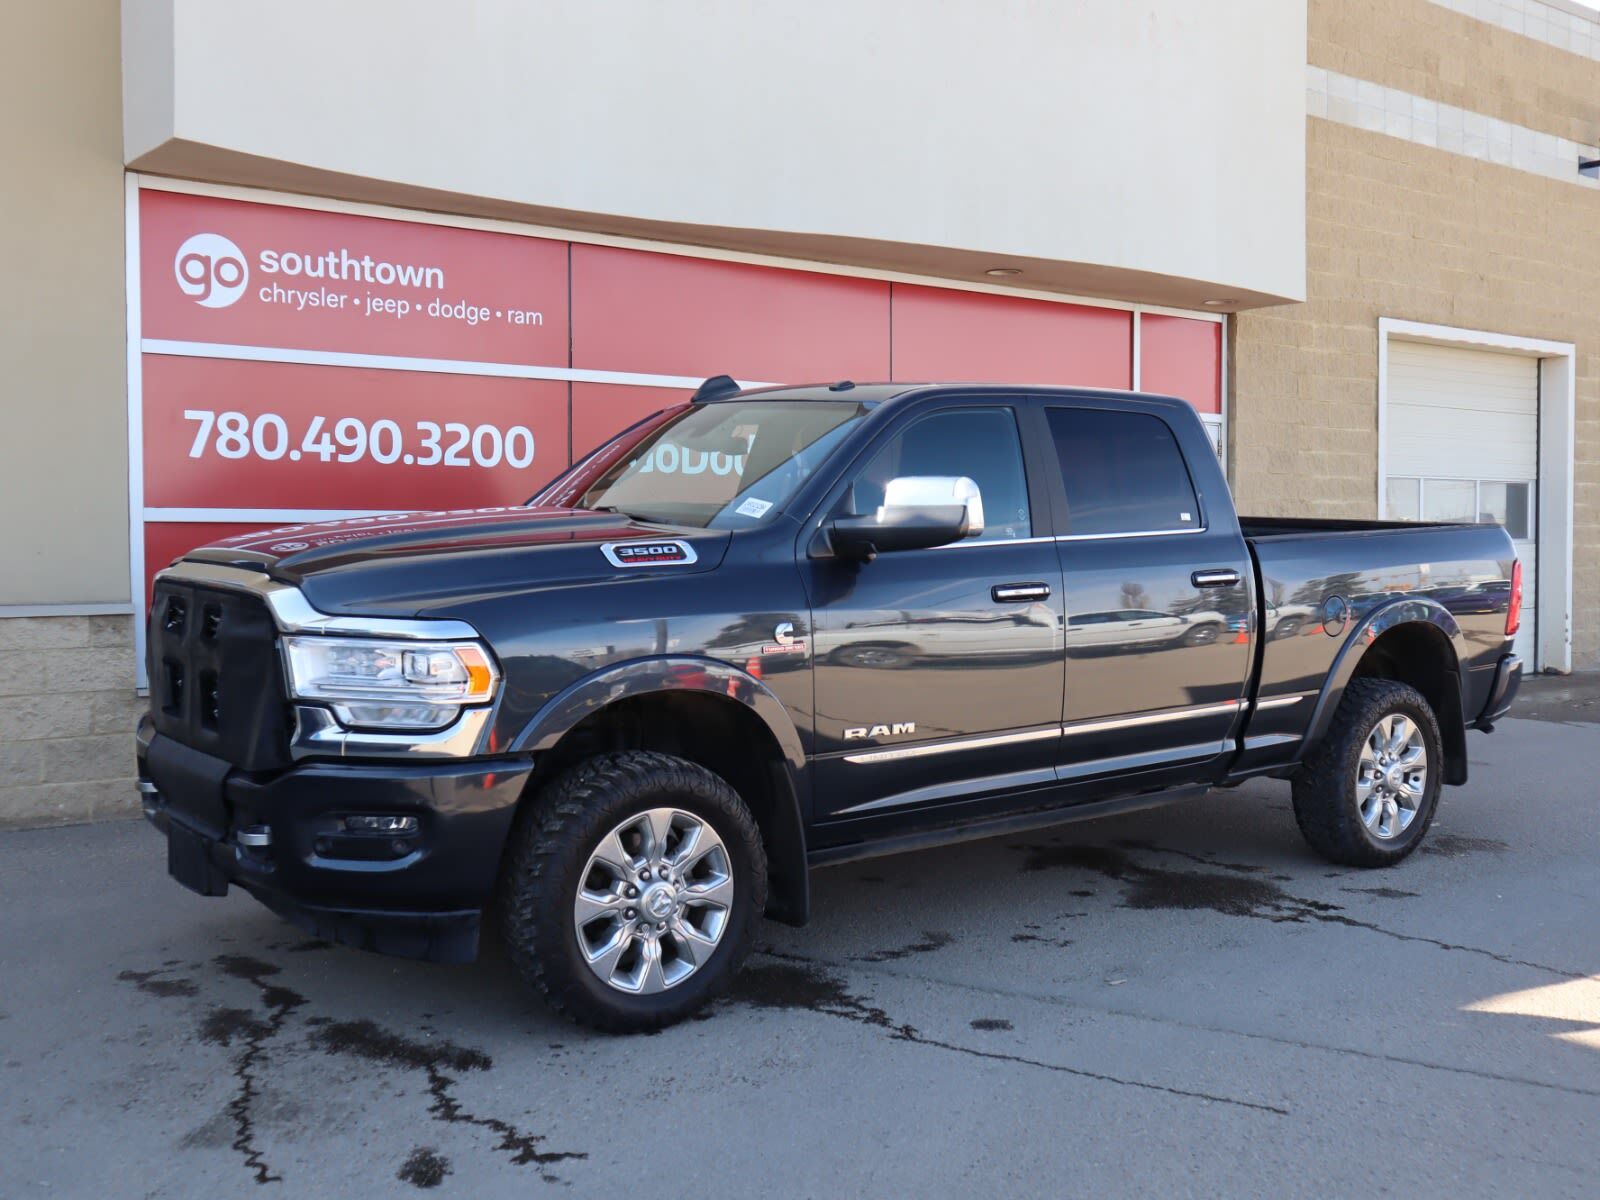 2019 Ram 3500 LIMITED IN MAX STEEL METALLIC EQUIPPED WITH A 6.7L